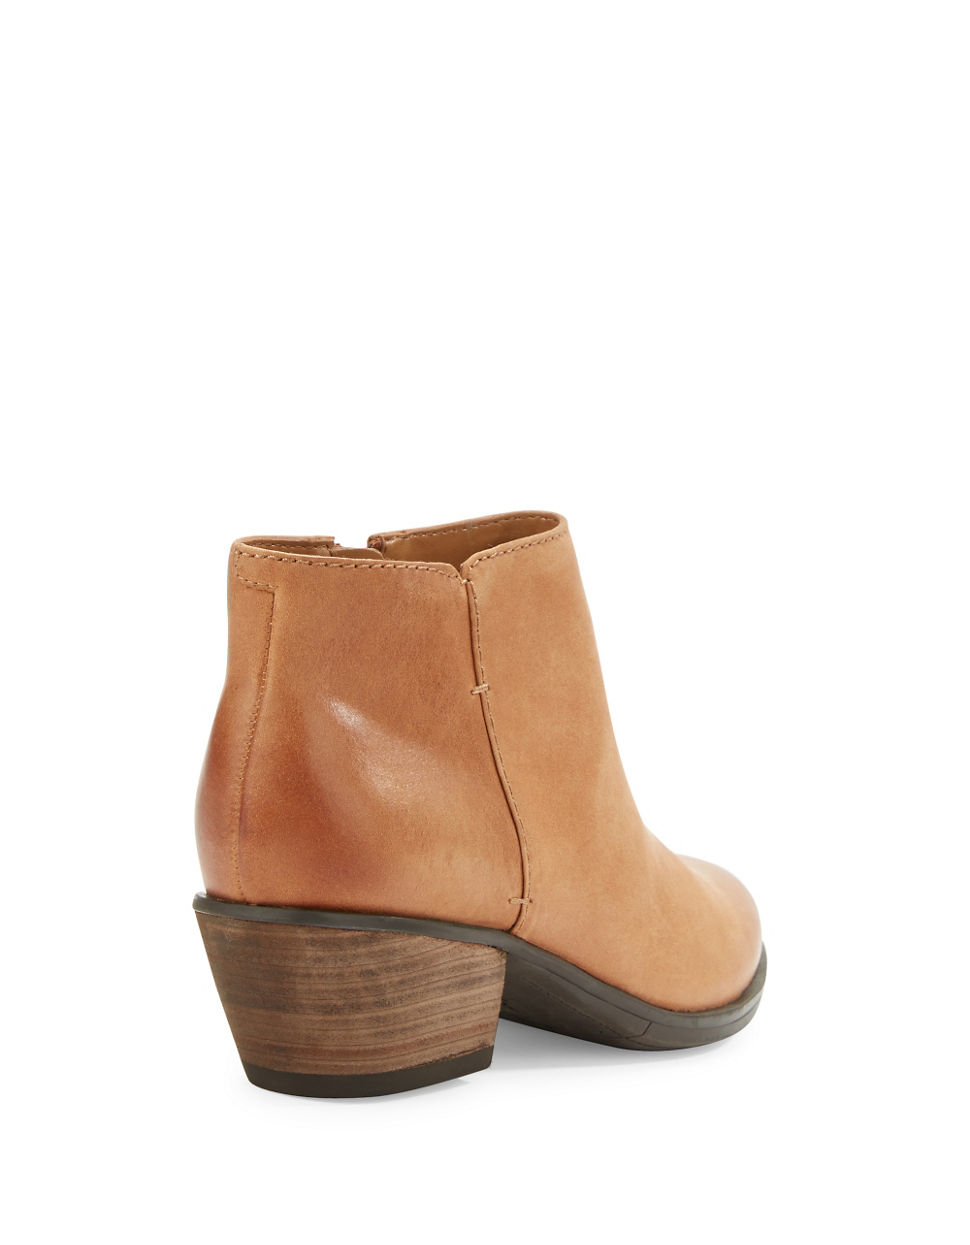 clarks brown leather ankle boots